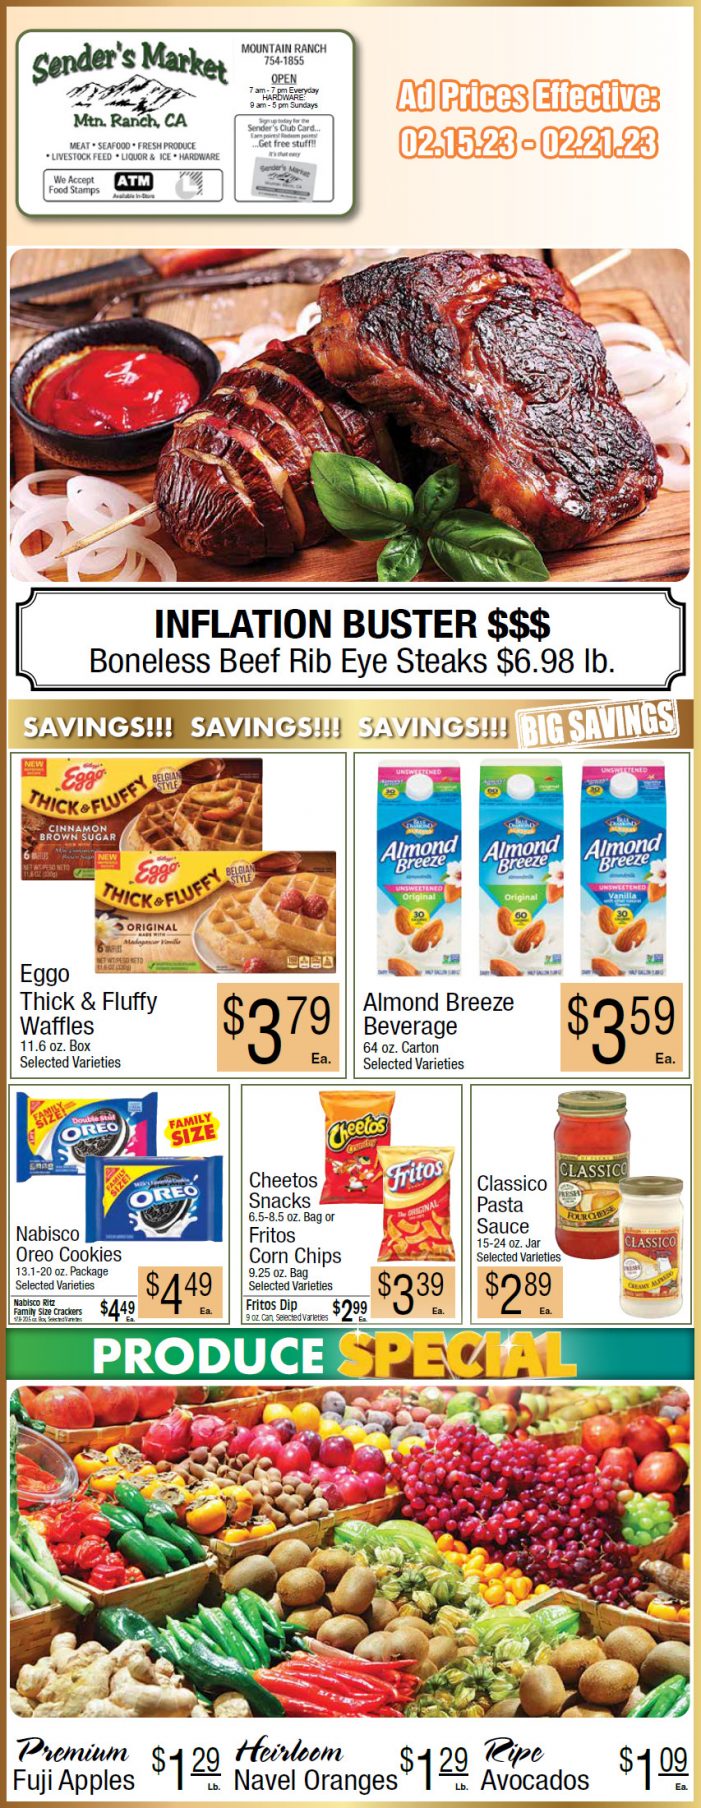 Sender’s Market Weekly Ad & Grocery Specials February 15 – 21st! Shop Local & Save!!